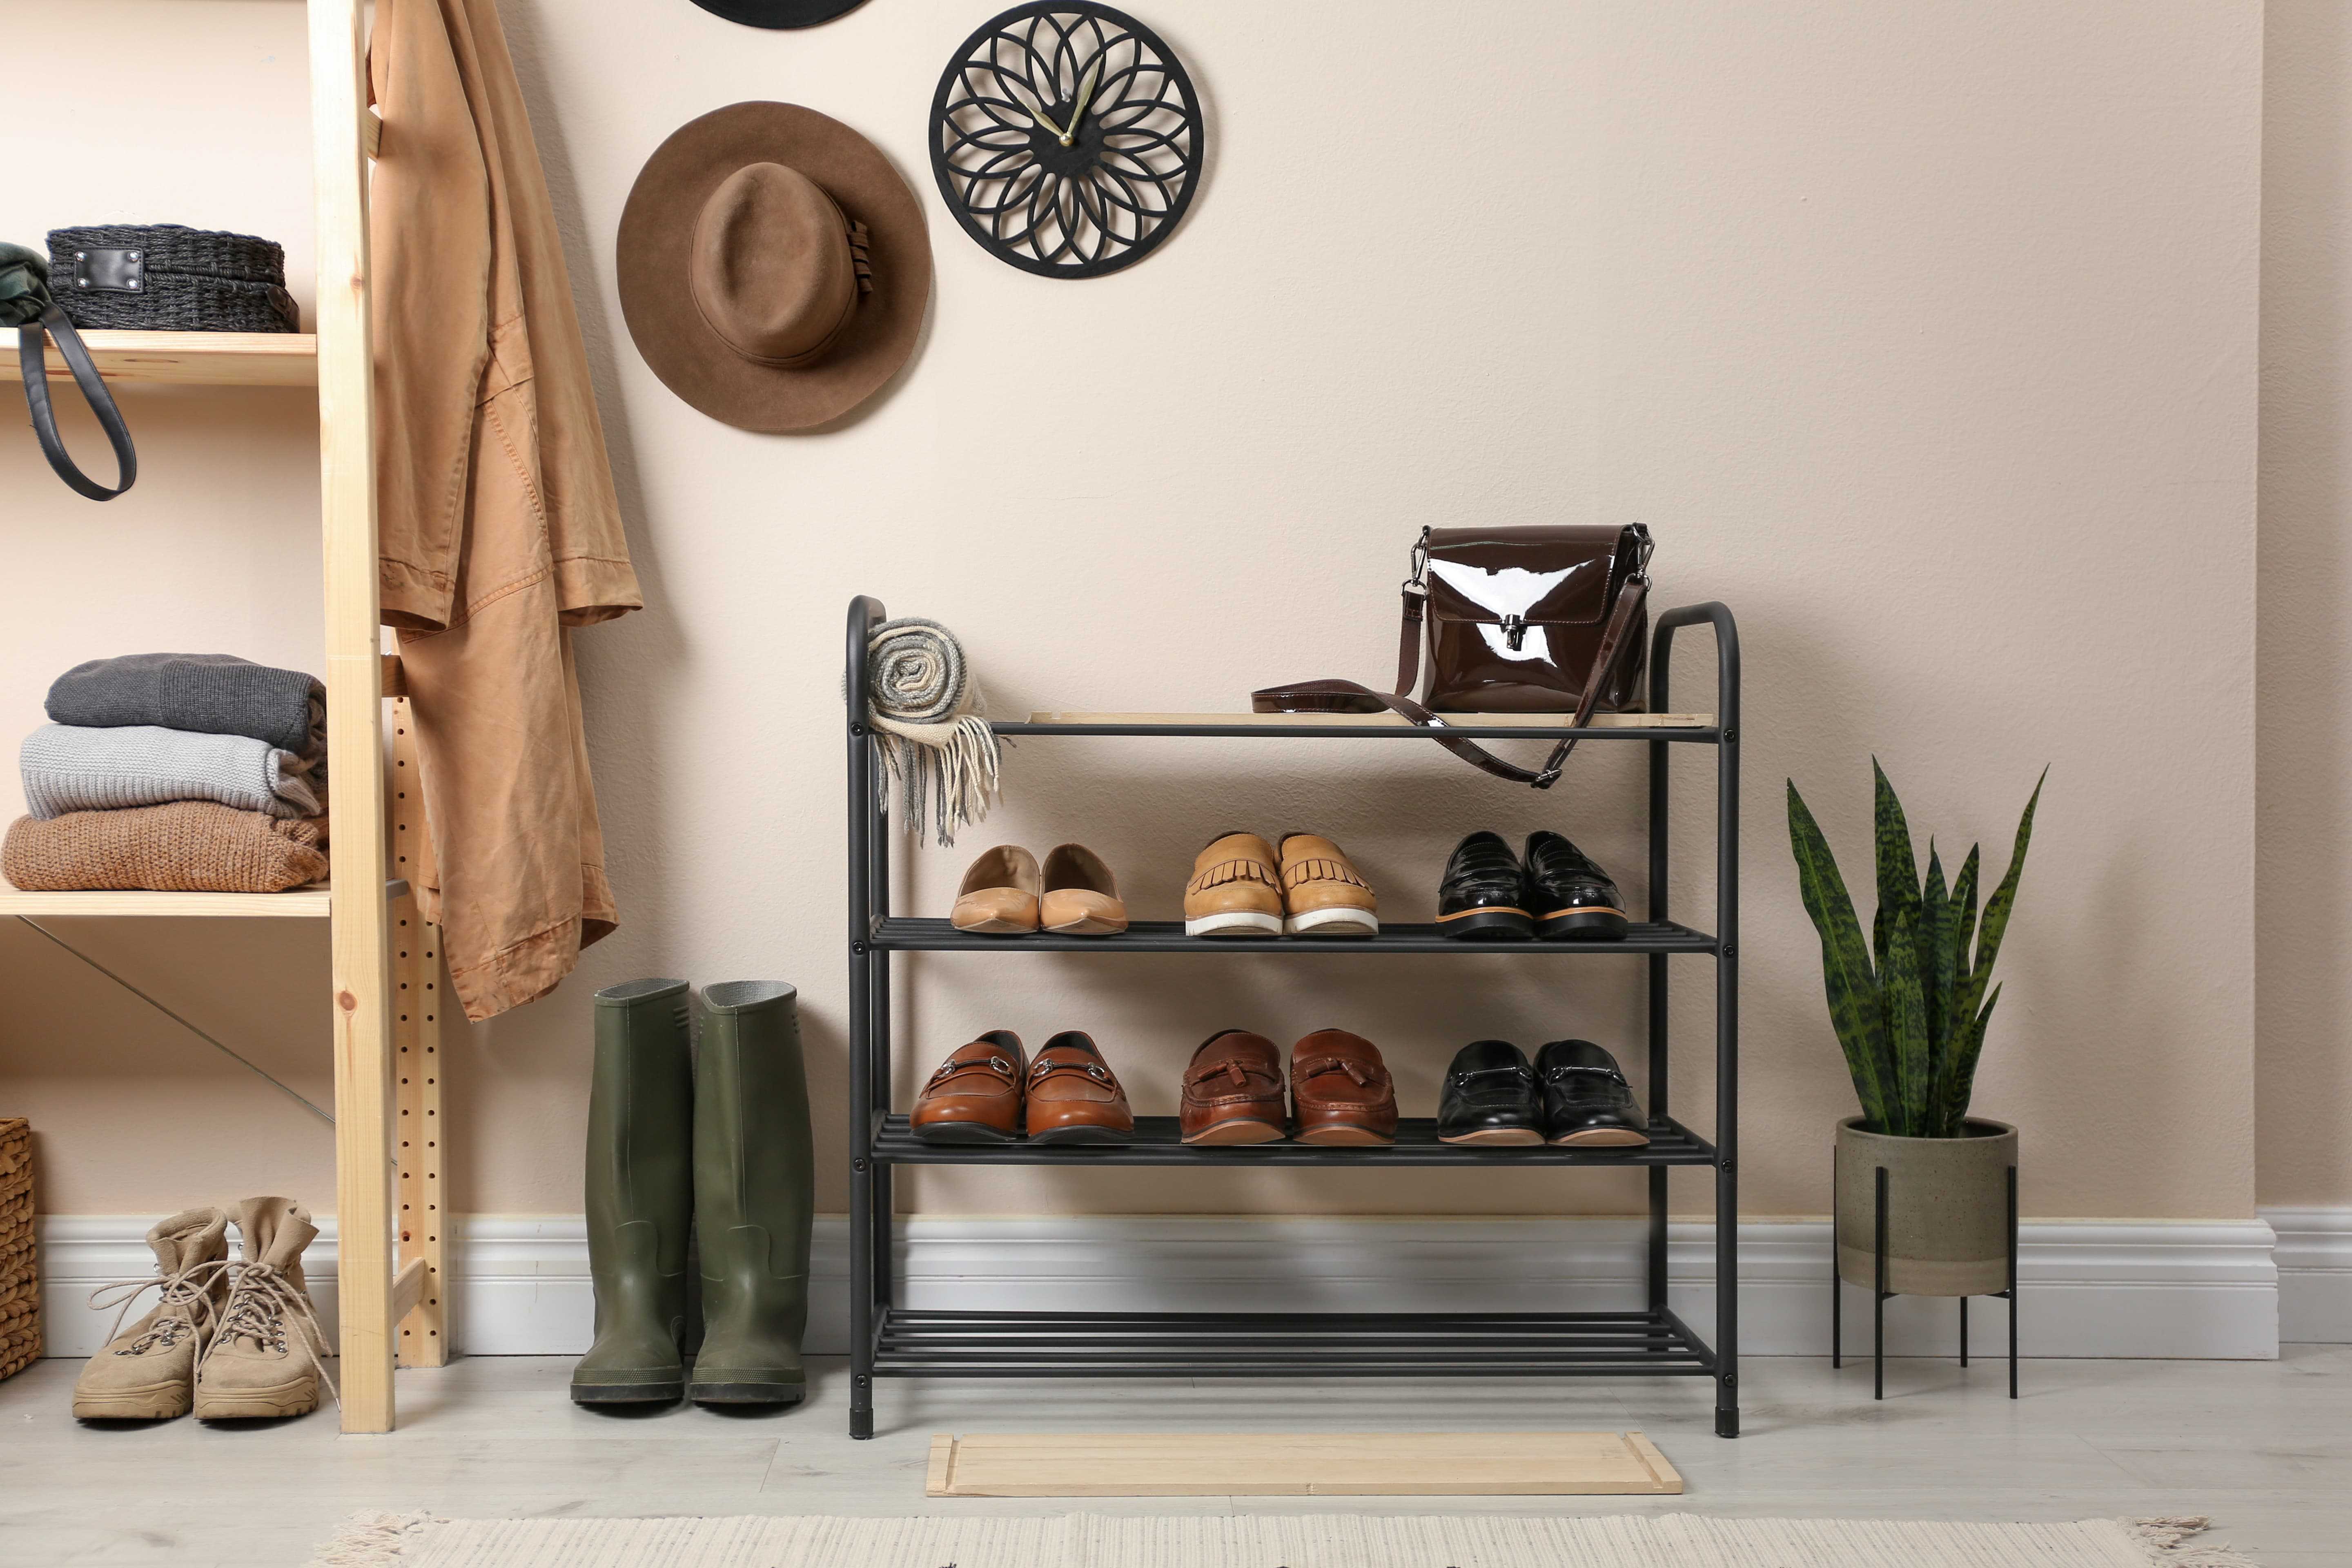 Shoe rack and storage in a home